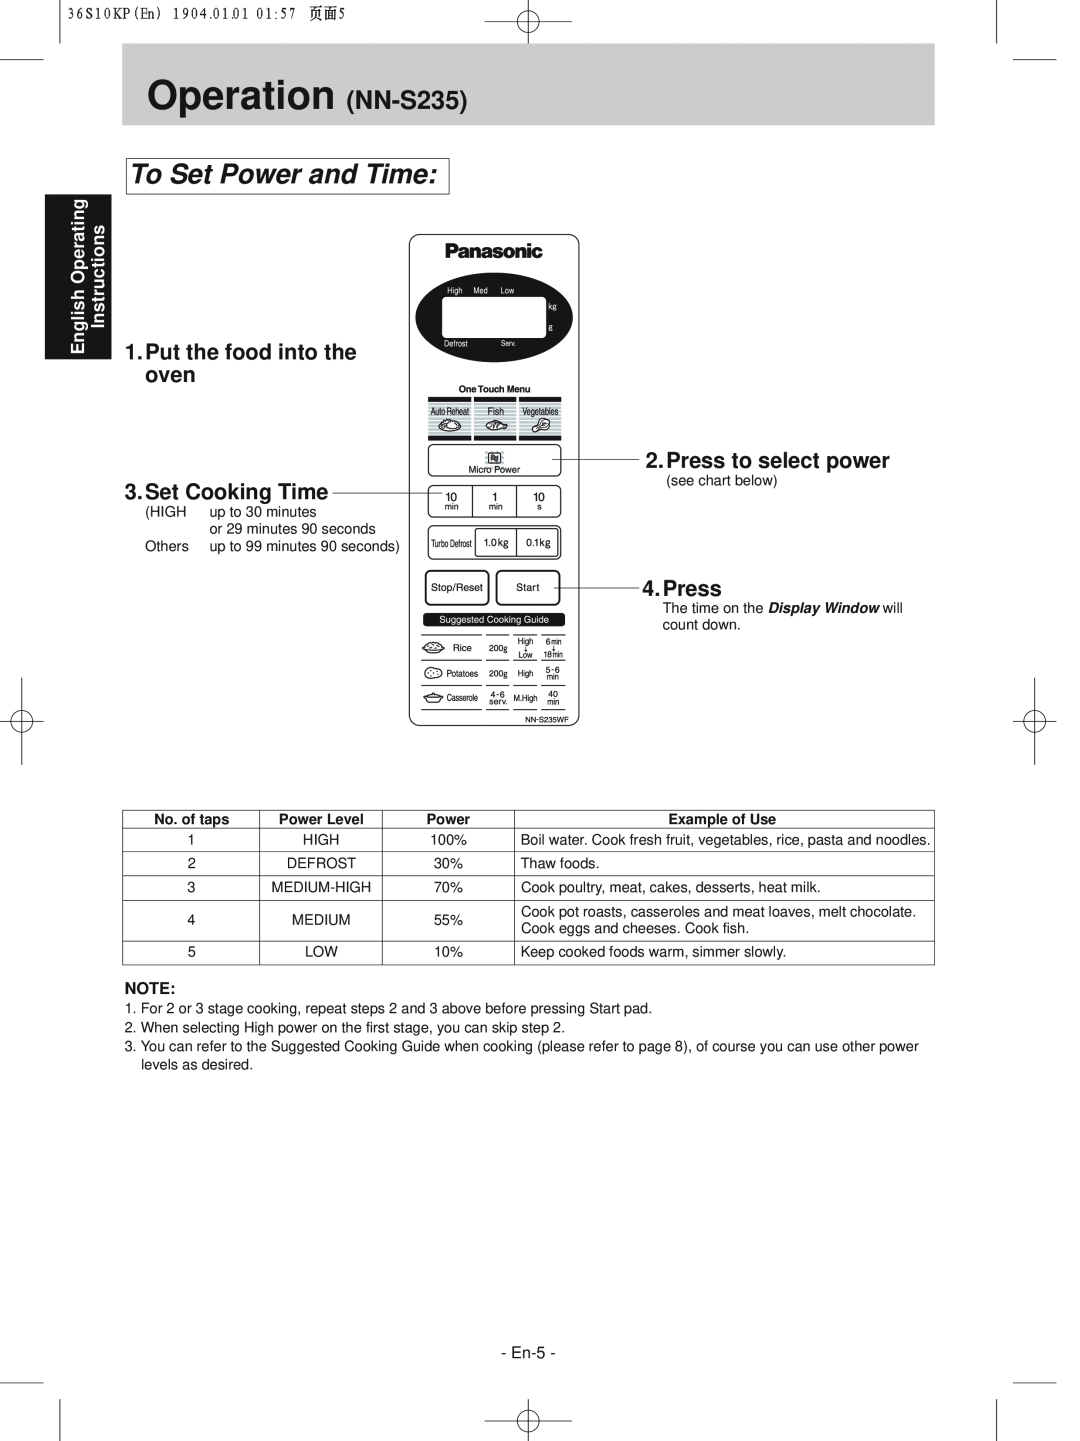 Panasonic NN-S235WF manual Operation NN-S235, To Set Power and Time, Press to select power, Instructions, English Operating 